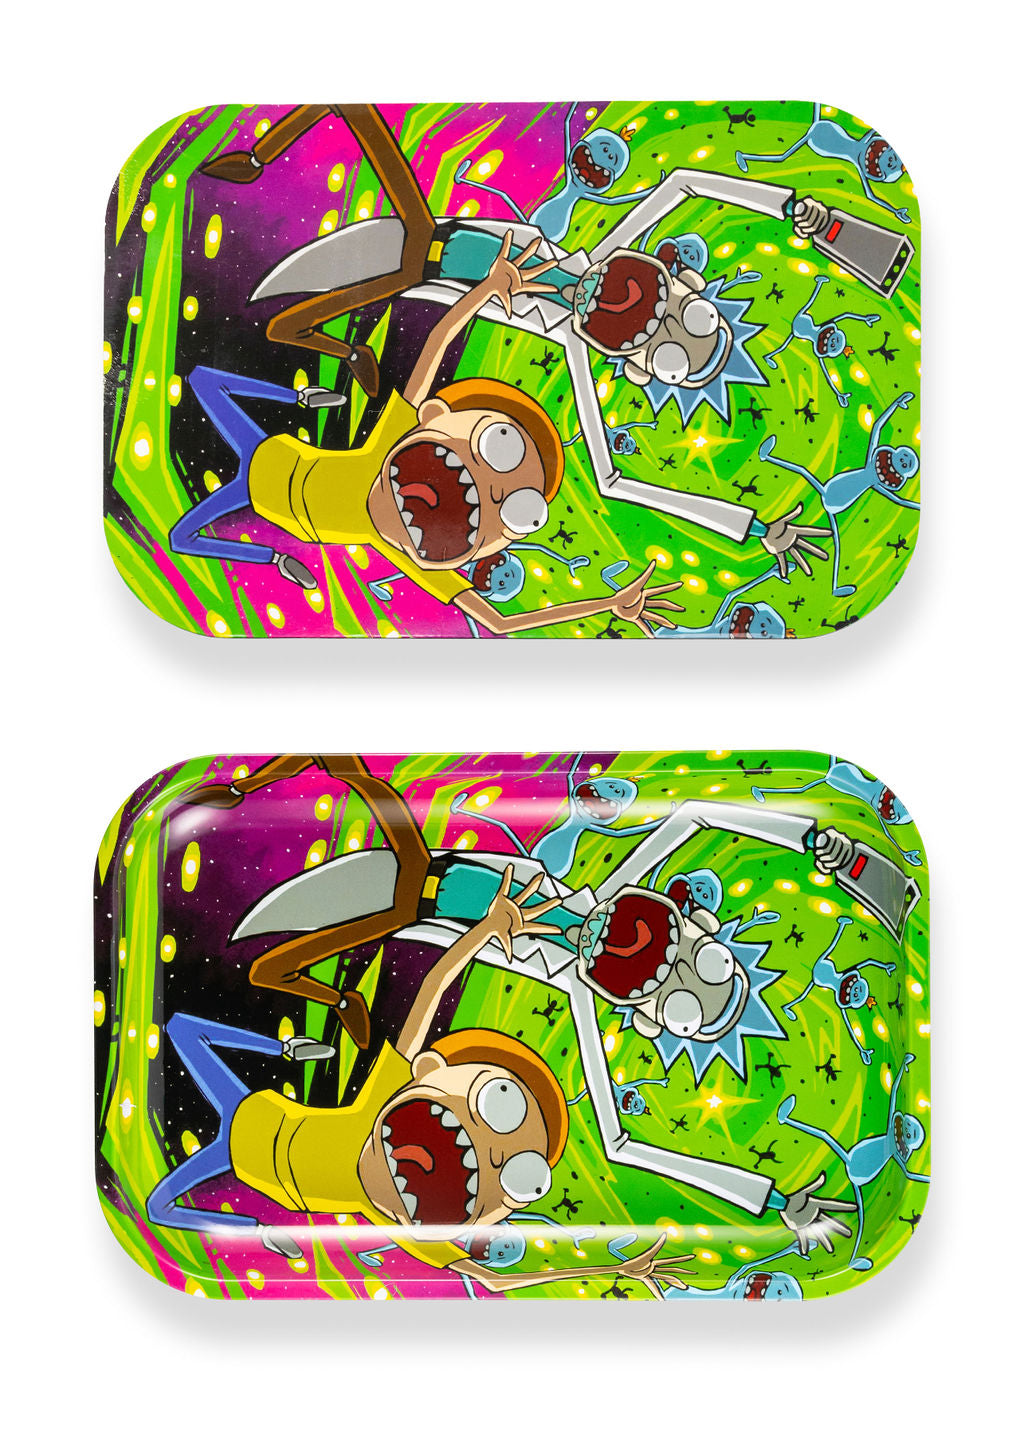 Tray Rick and Morty rolling tray - Buy Tray Liar at Pevgrow